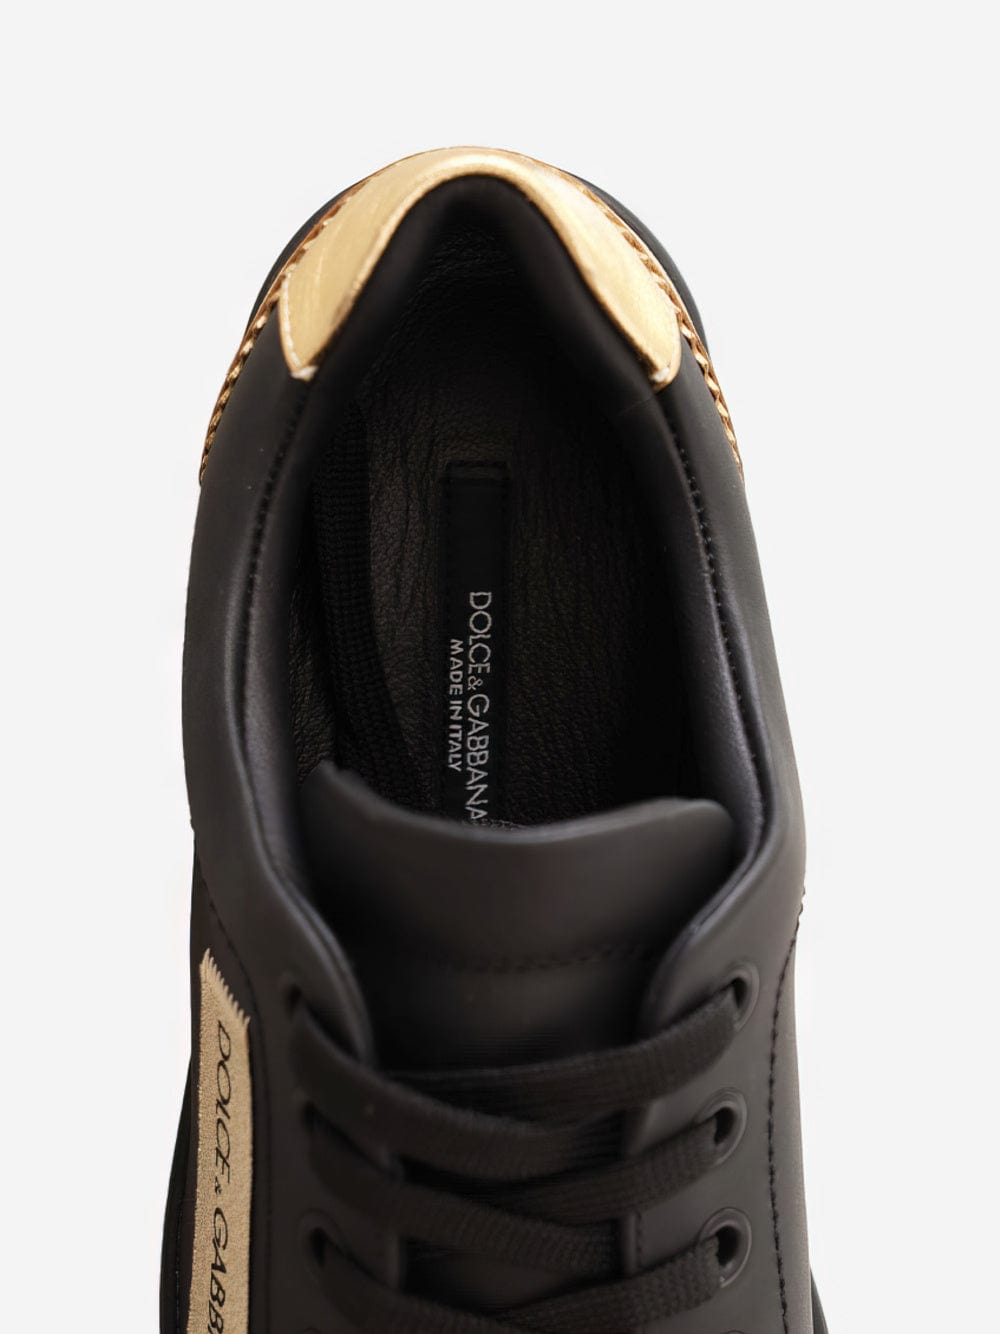 Dolce & Gabbana Logo Low-Top Leather Sneakers